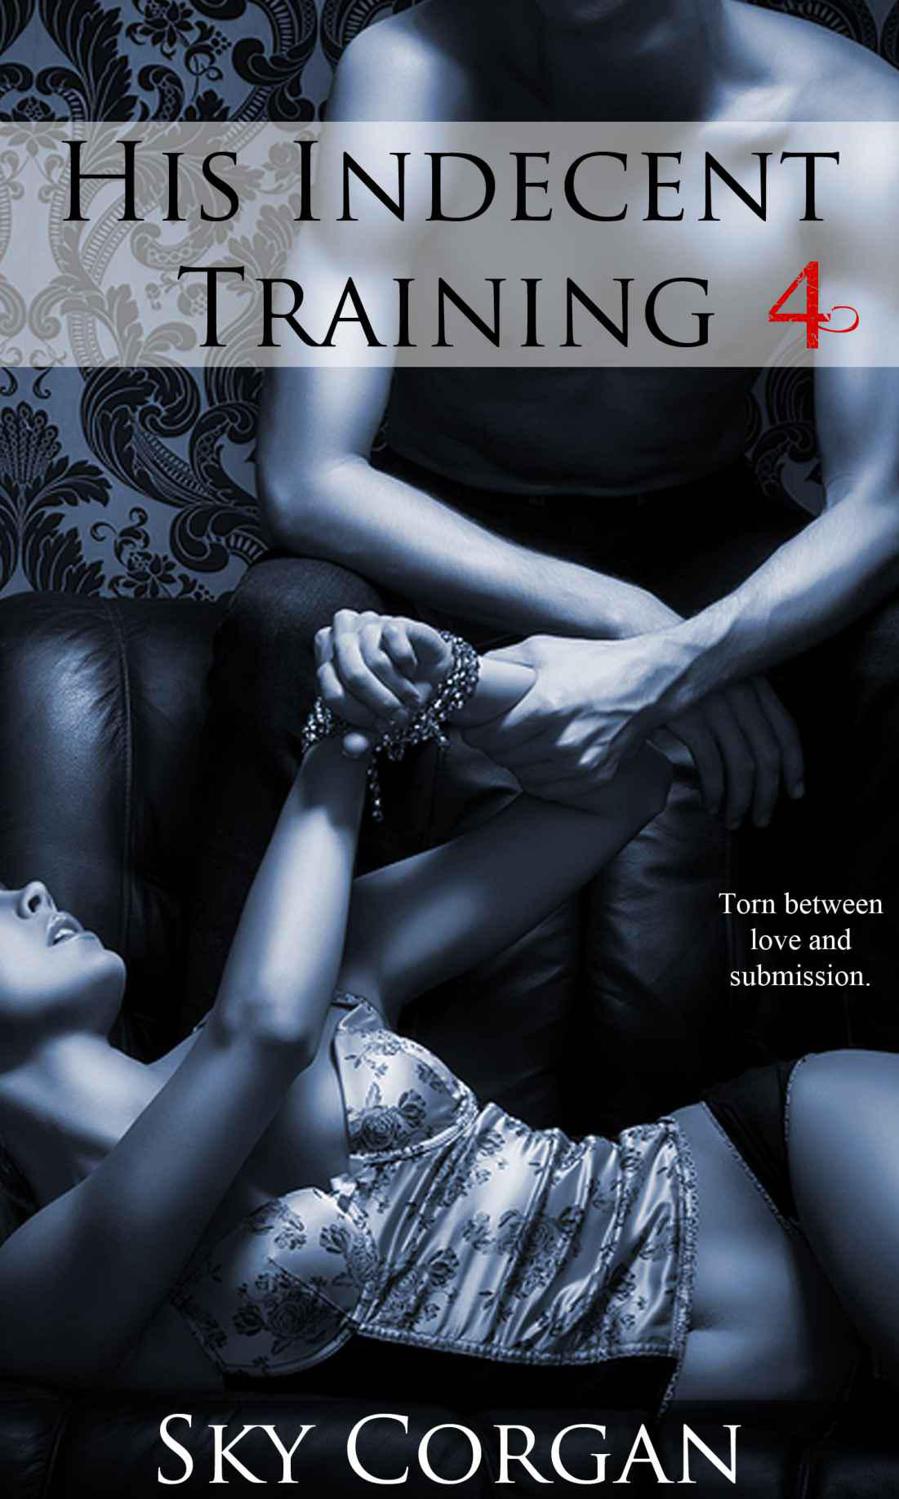 His Indecent Training 4 by Sky Corgan